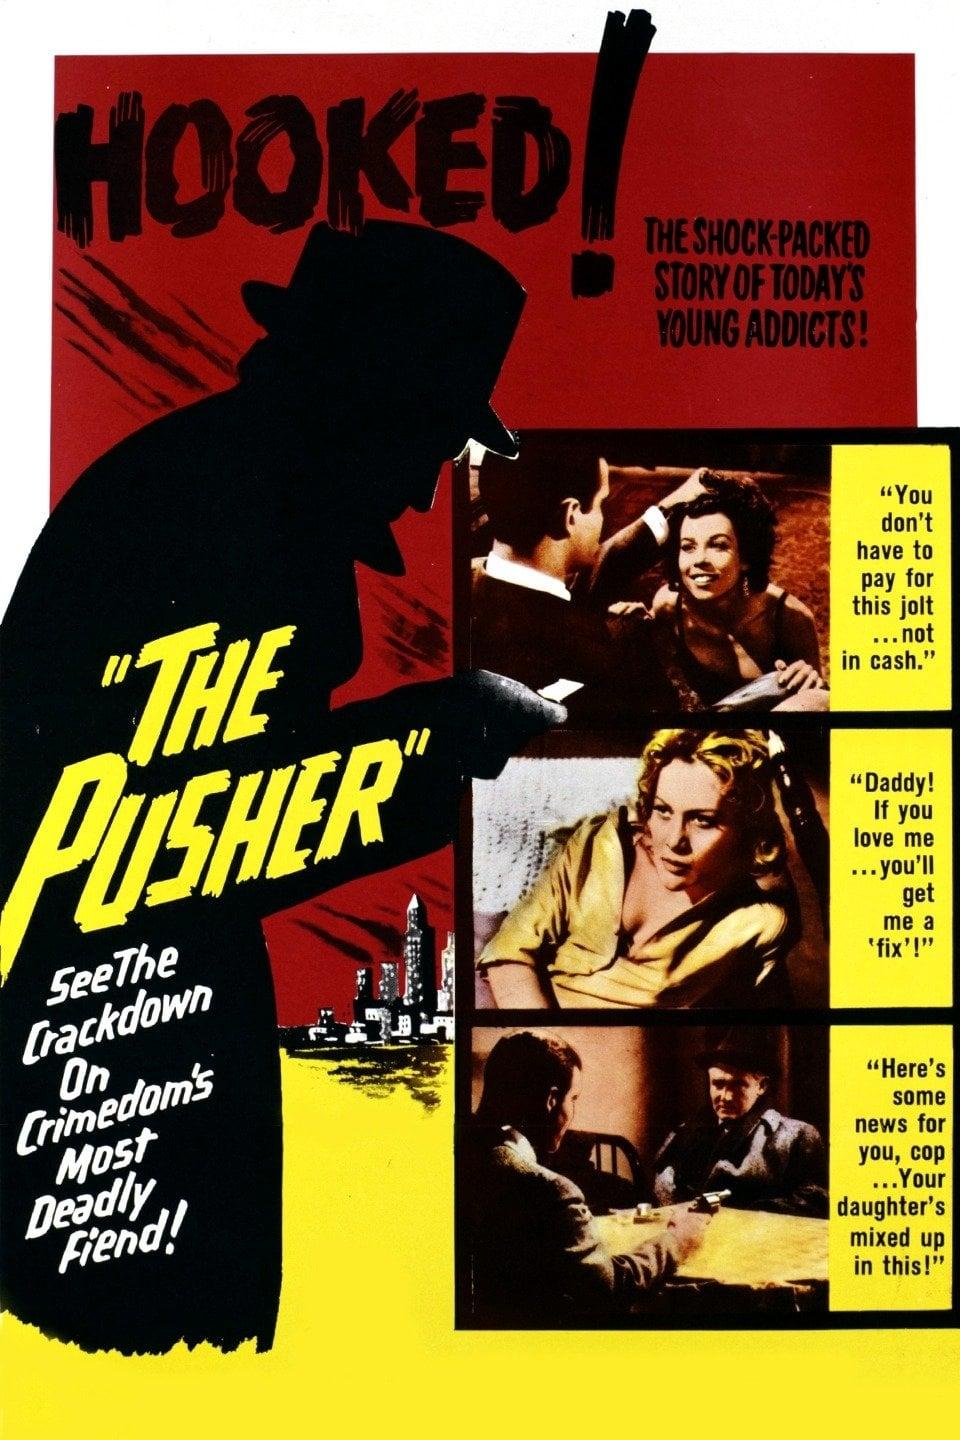 The Pusher poster